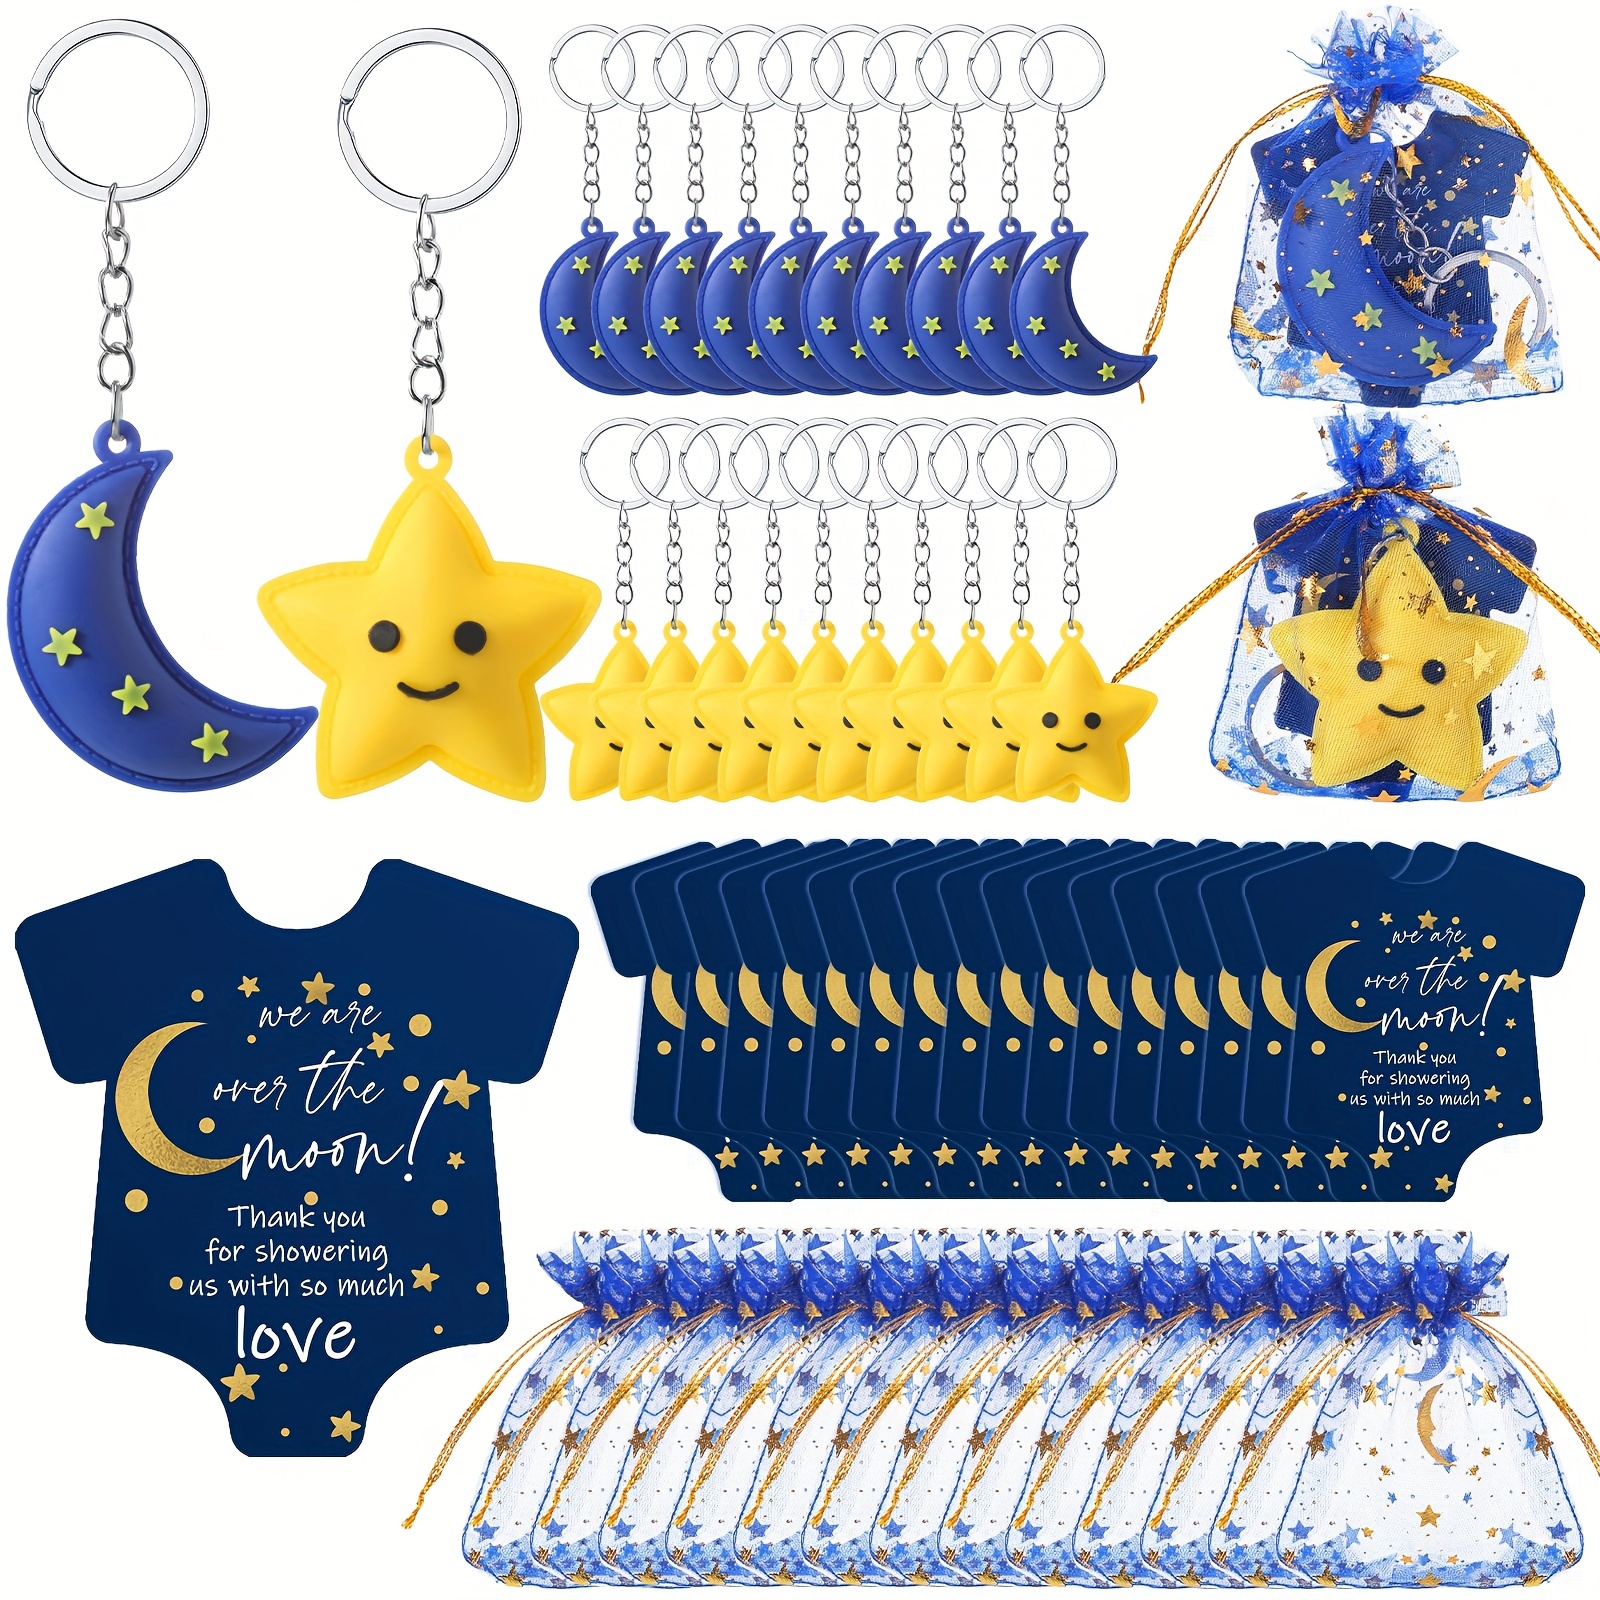 

300 Pcs Baby Shower Keychain Decoration Baby Shower Party Favors Moon Star Keychains Little Star Favors Thank You Cards Organza Bags For Guests Gender Reveal Keepsakes